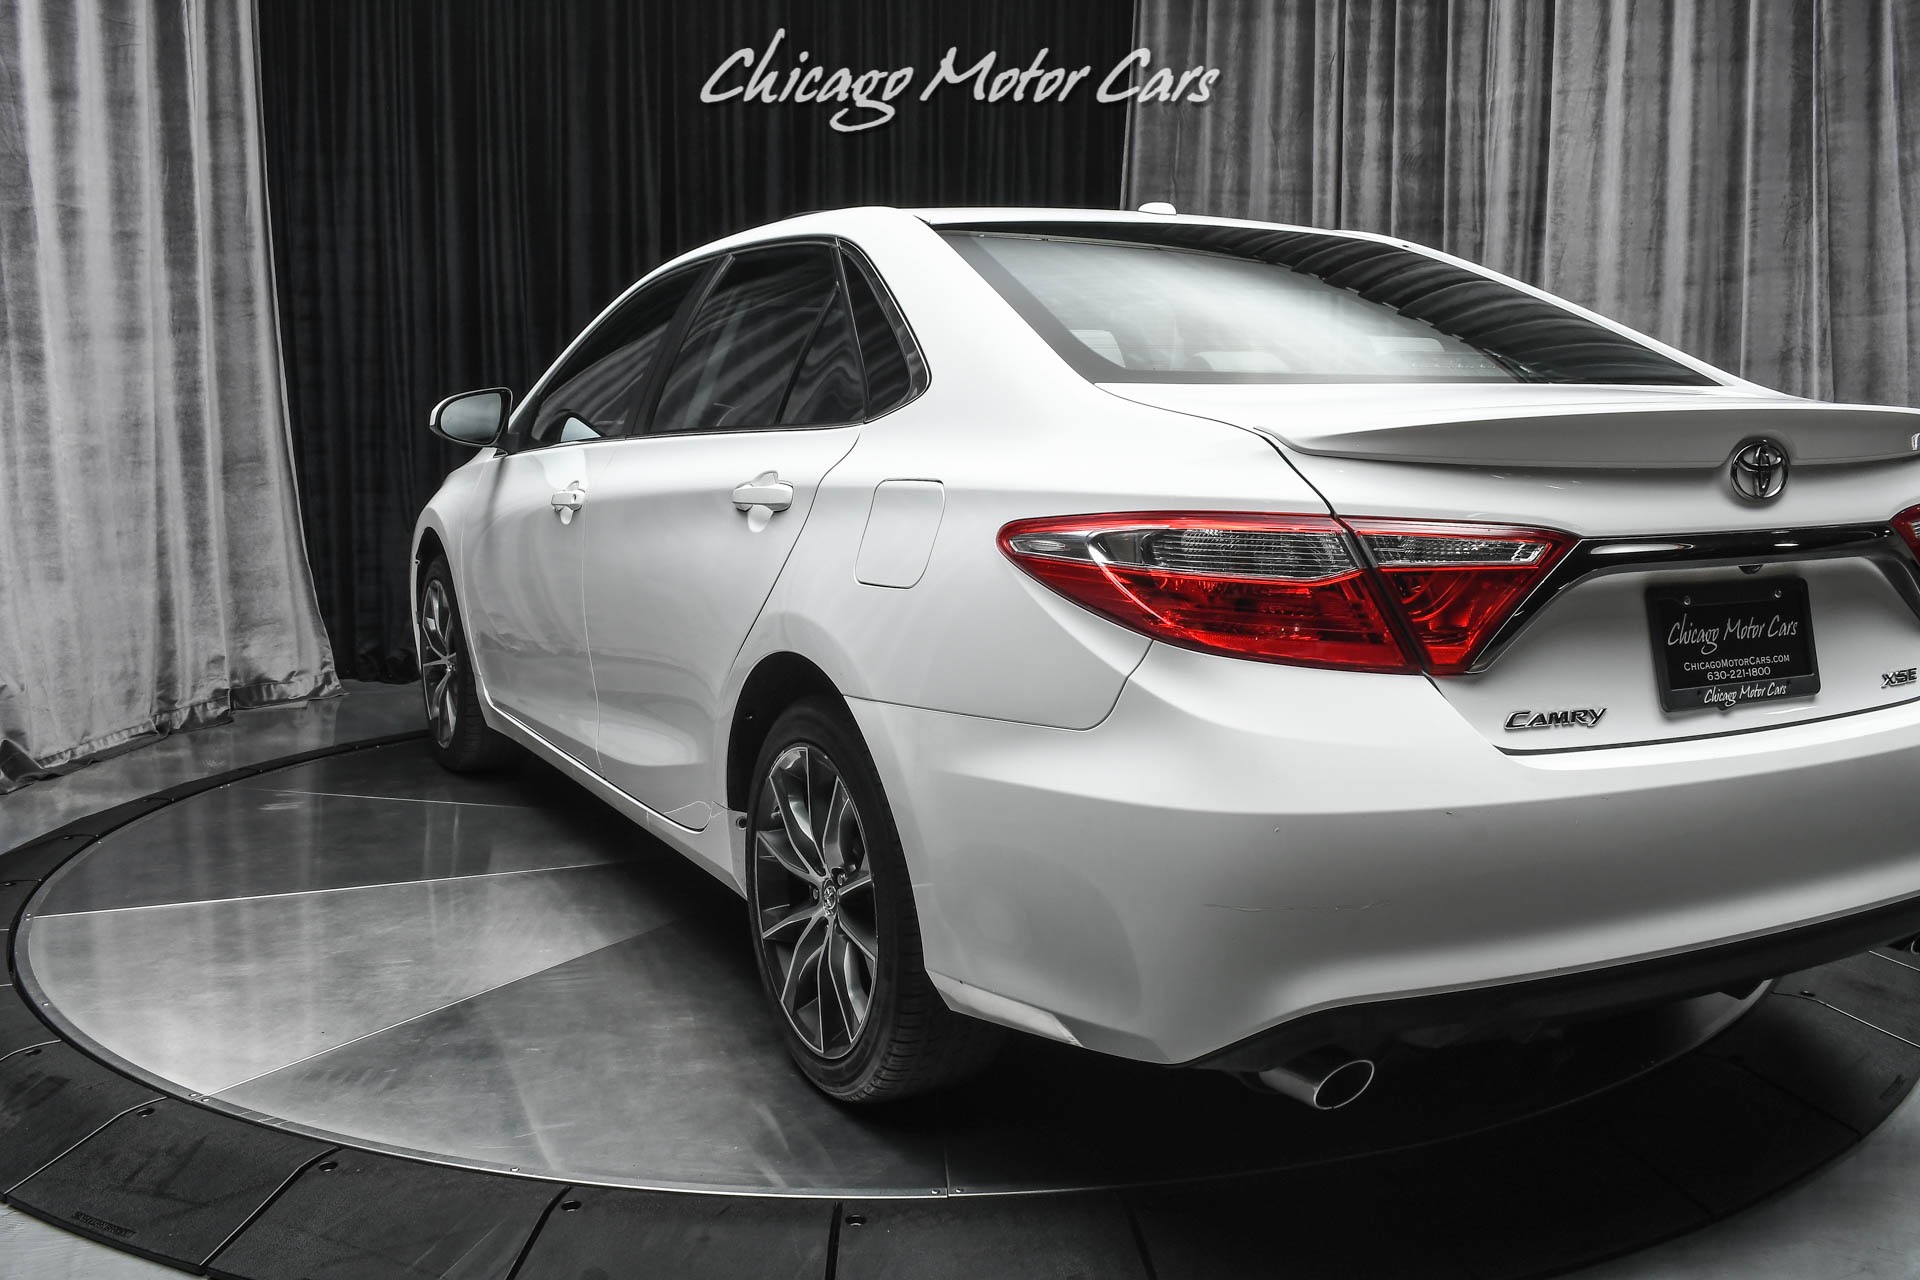 Used-2015-Toyota-Camry-XSE-V6-Navigation-JBL-Upgraded-Audio-Technology-Package